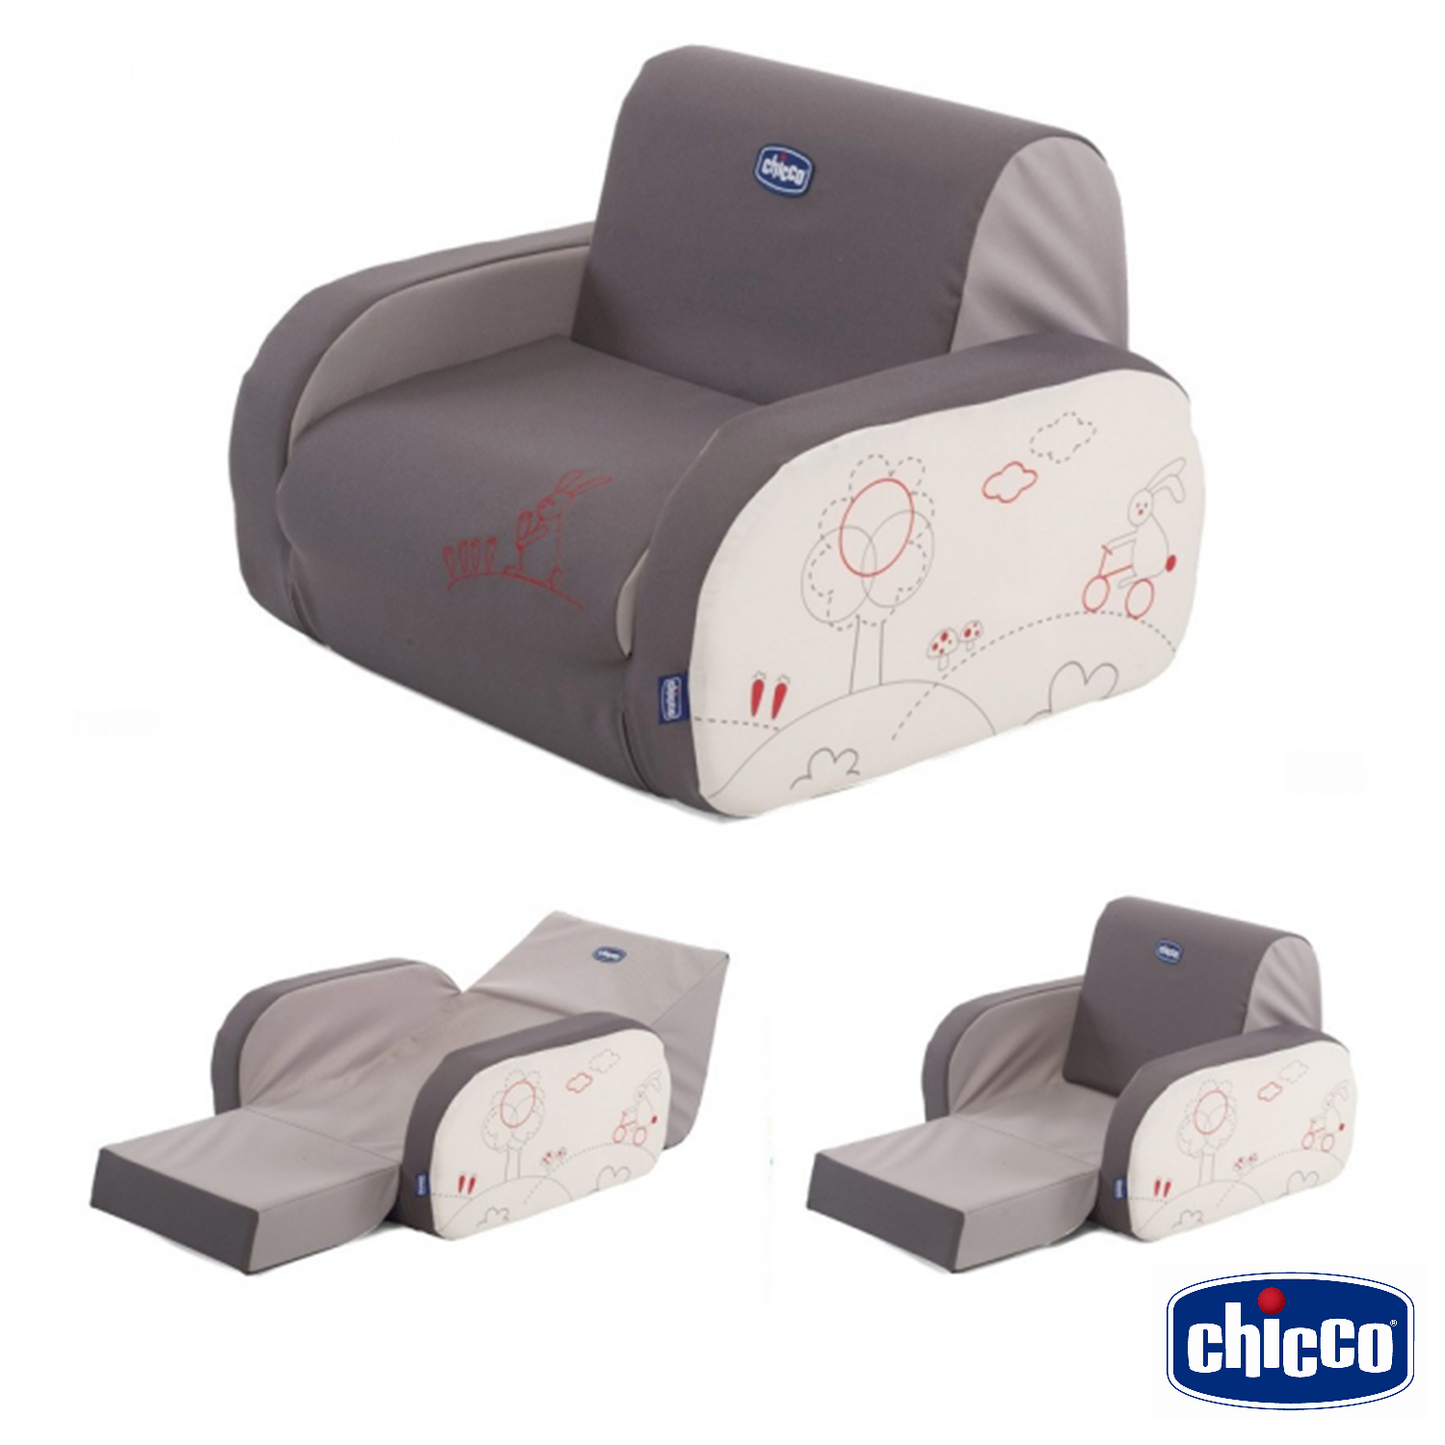 Chicco – Twist Armchair All Colors